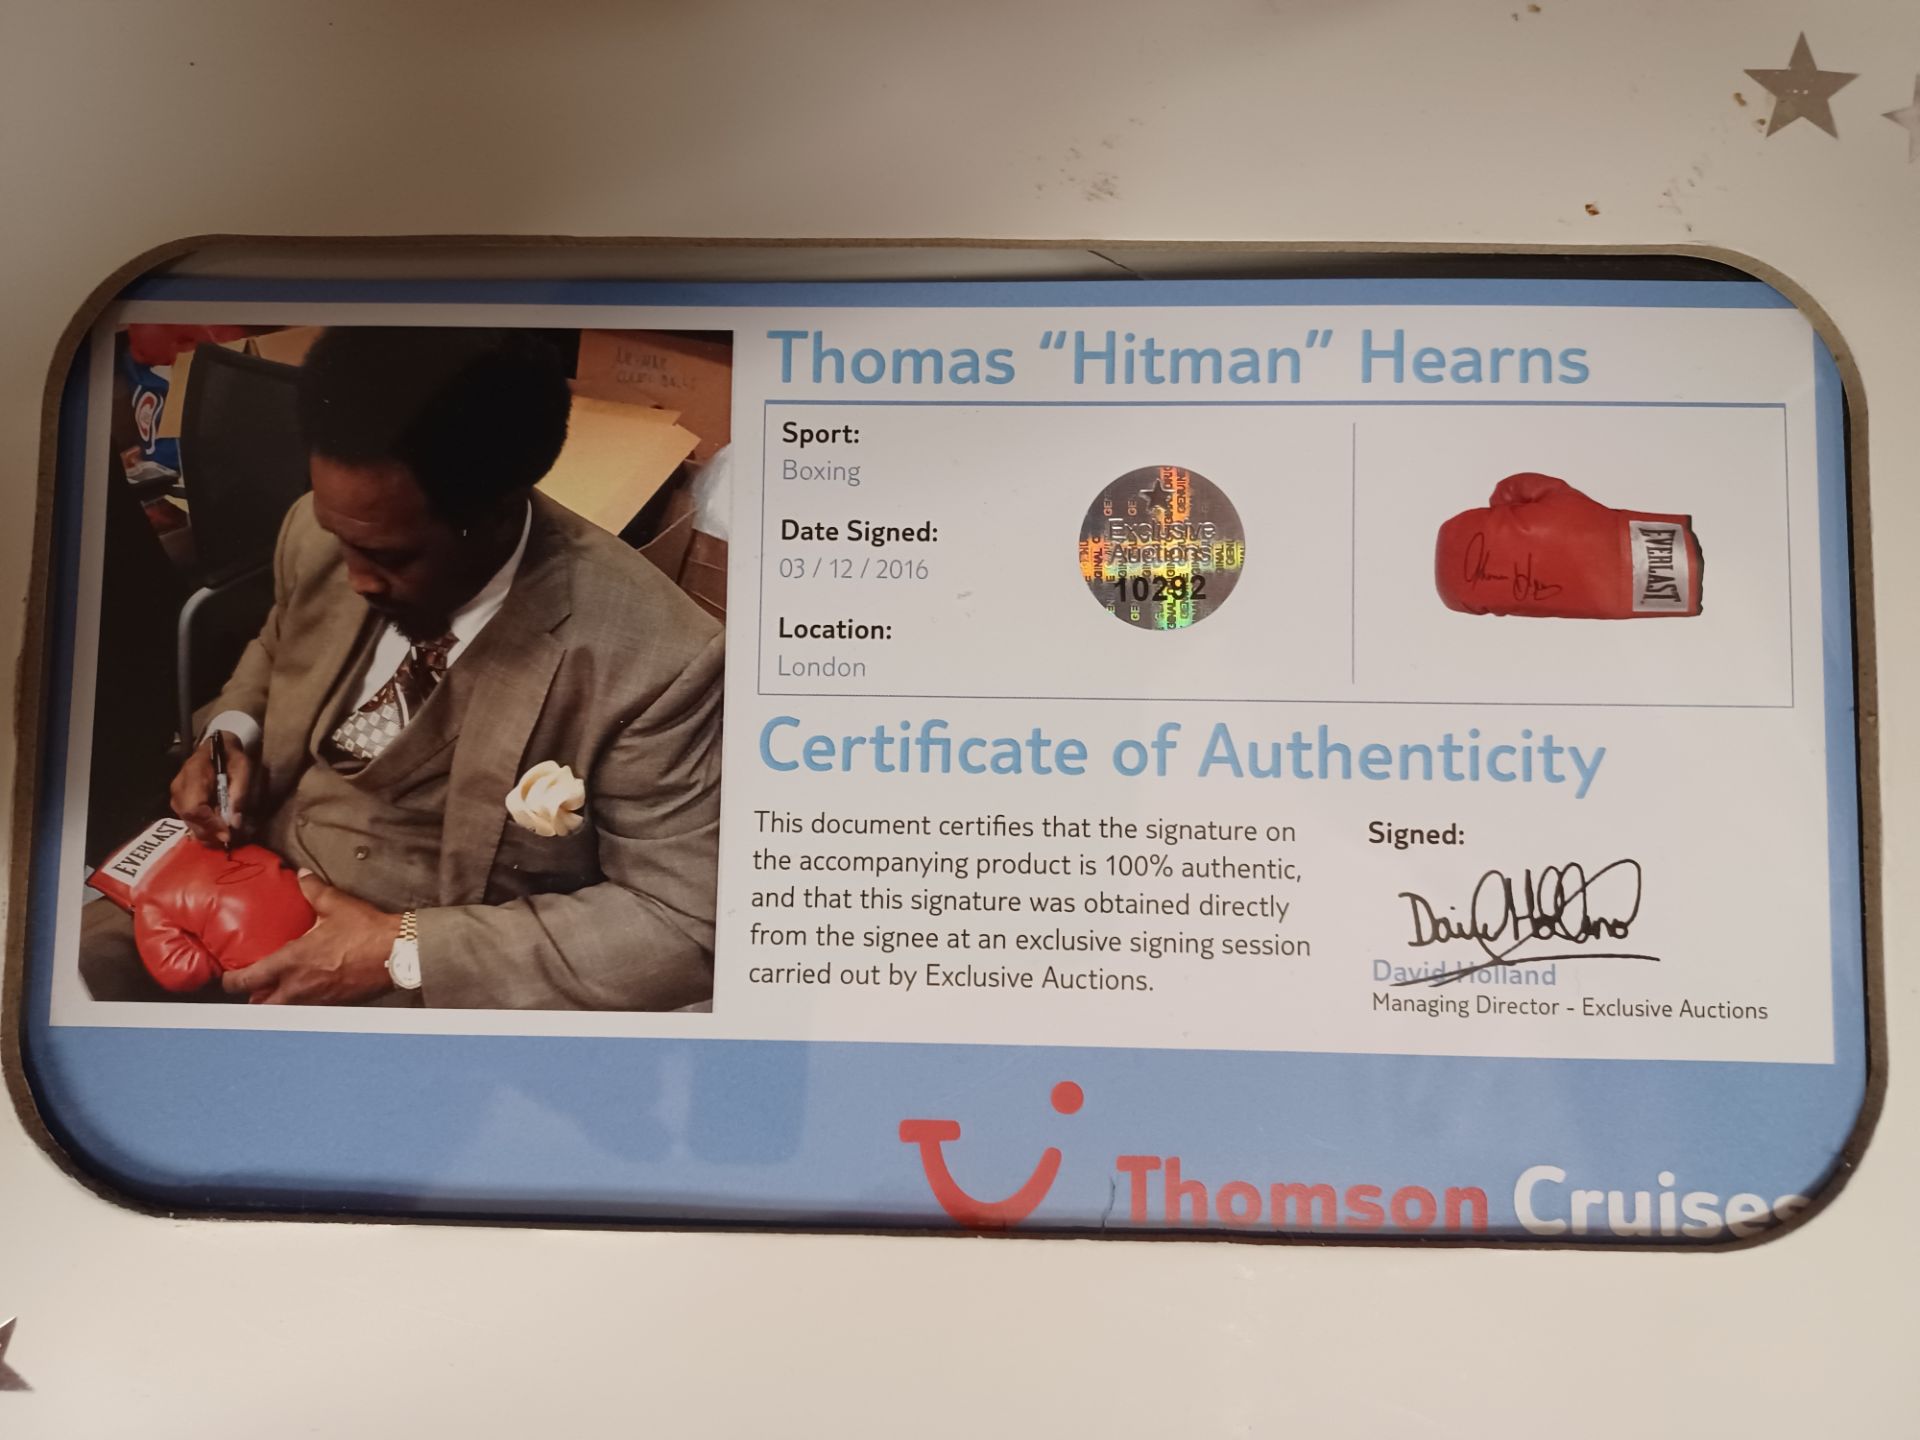 Authentic Thomas "Hitman" Hearns Signed Boxing Glove - Image 2 of 2